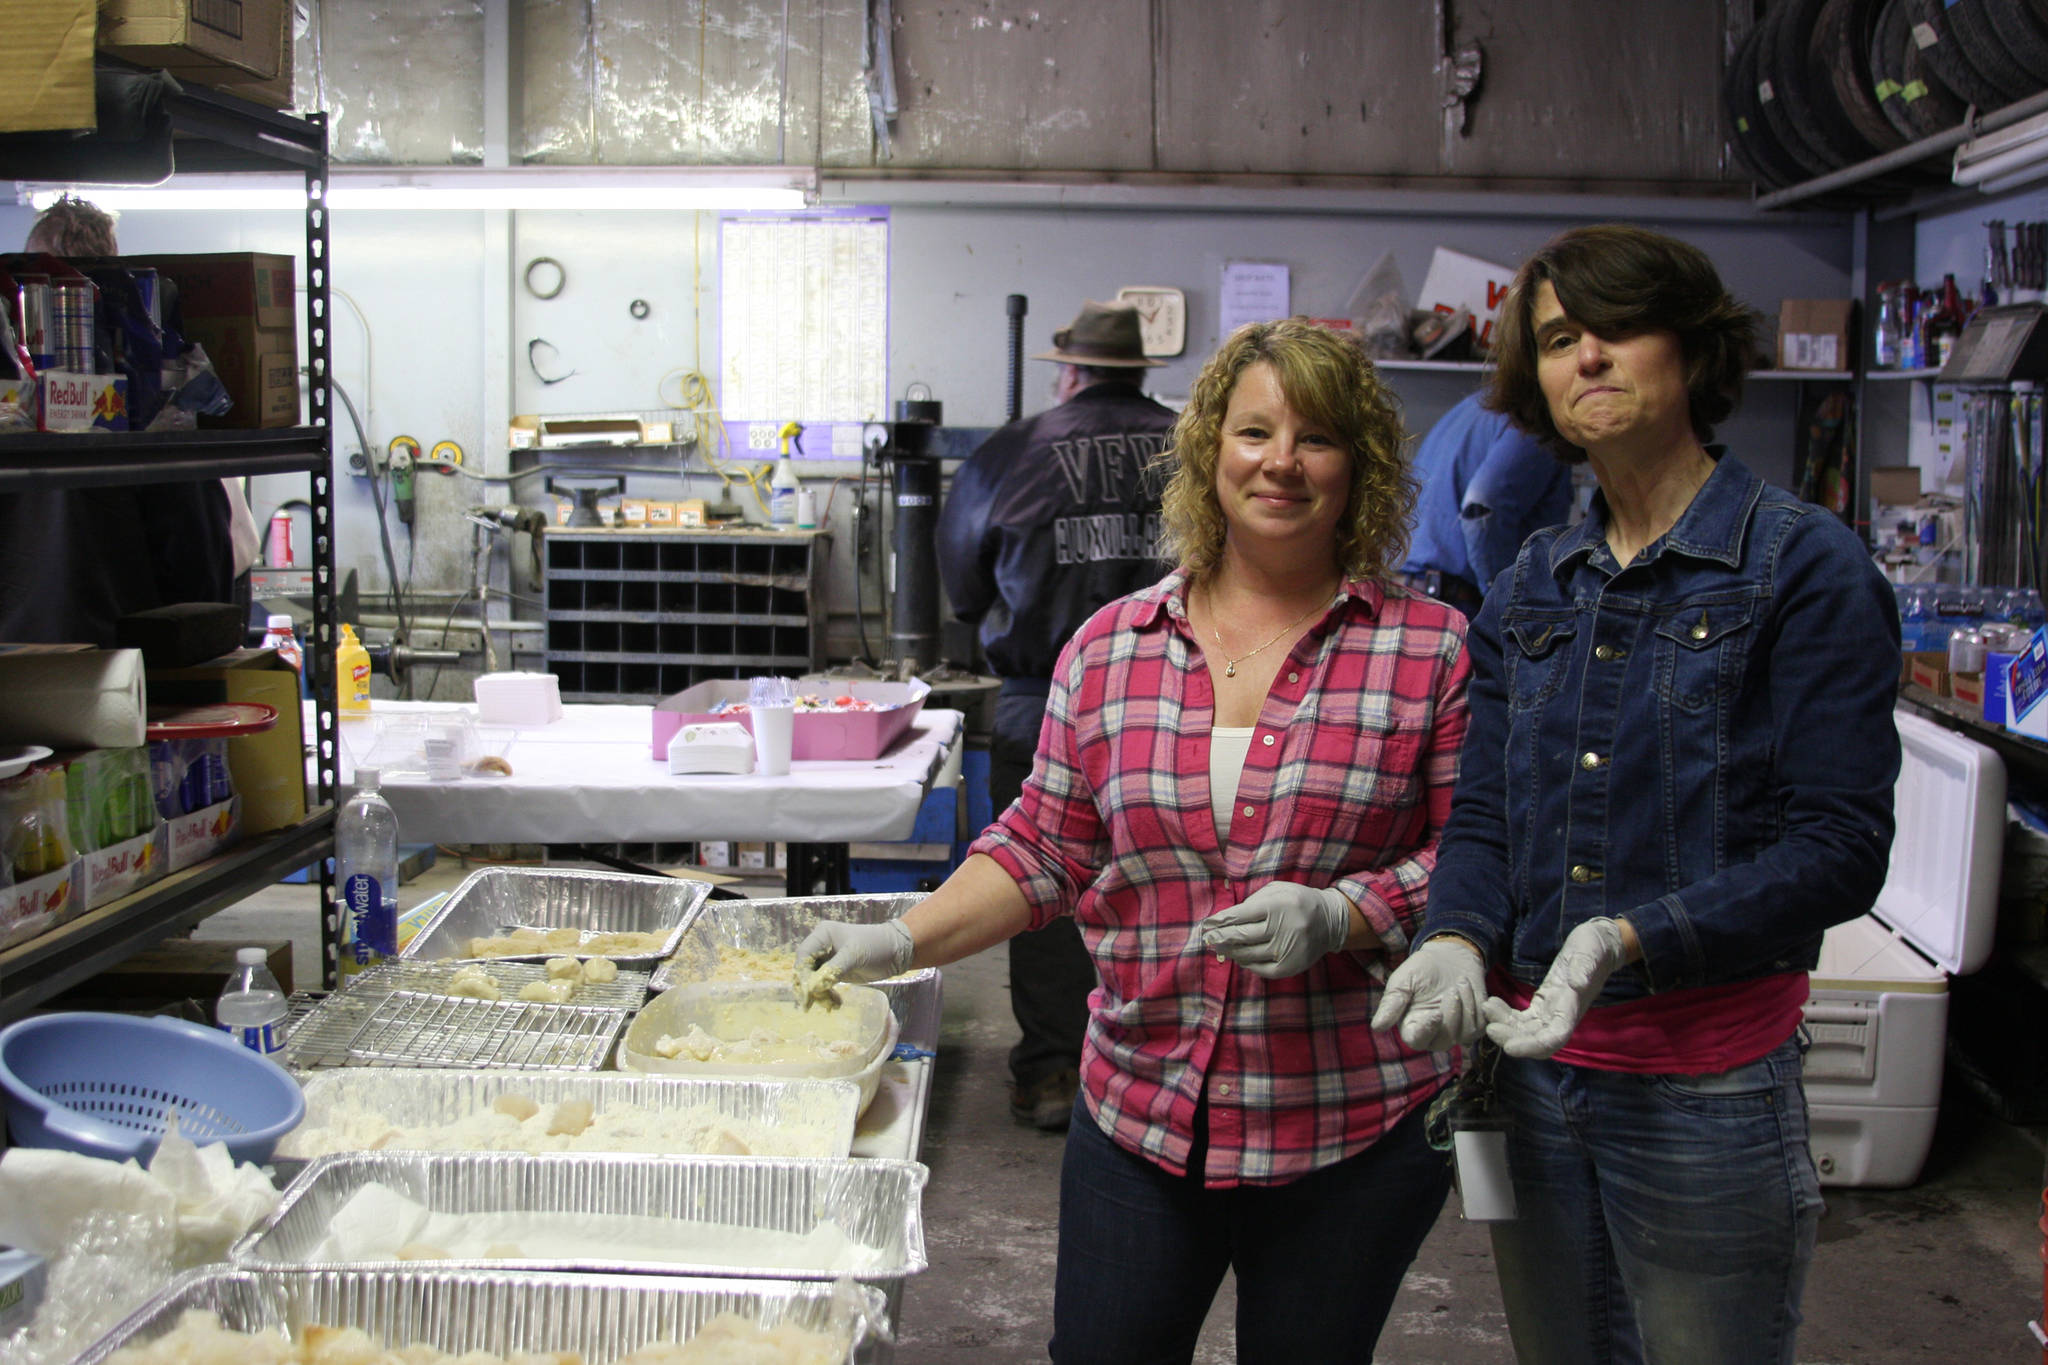 Brandi Blauvelt, left, and Ruth Mitchell, right, prepare freshly caught halibut for the fifth annual Customer Appreciation Day and 50th anniversary celebration on Saturday, May 25 at Thurmond’s Far West Auto in Anchor Point, Alaska. (Photo by Delcenia Cosman)